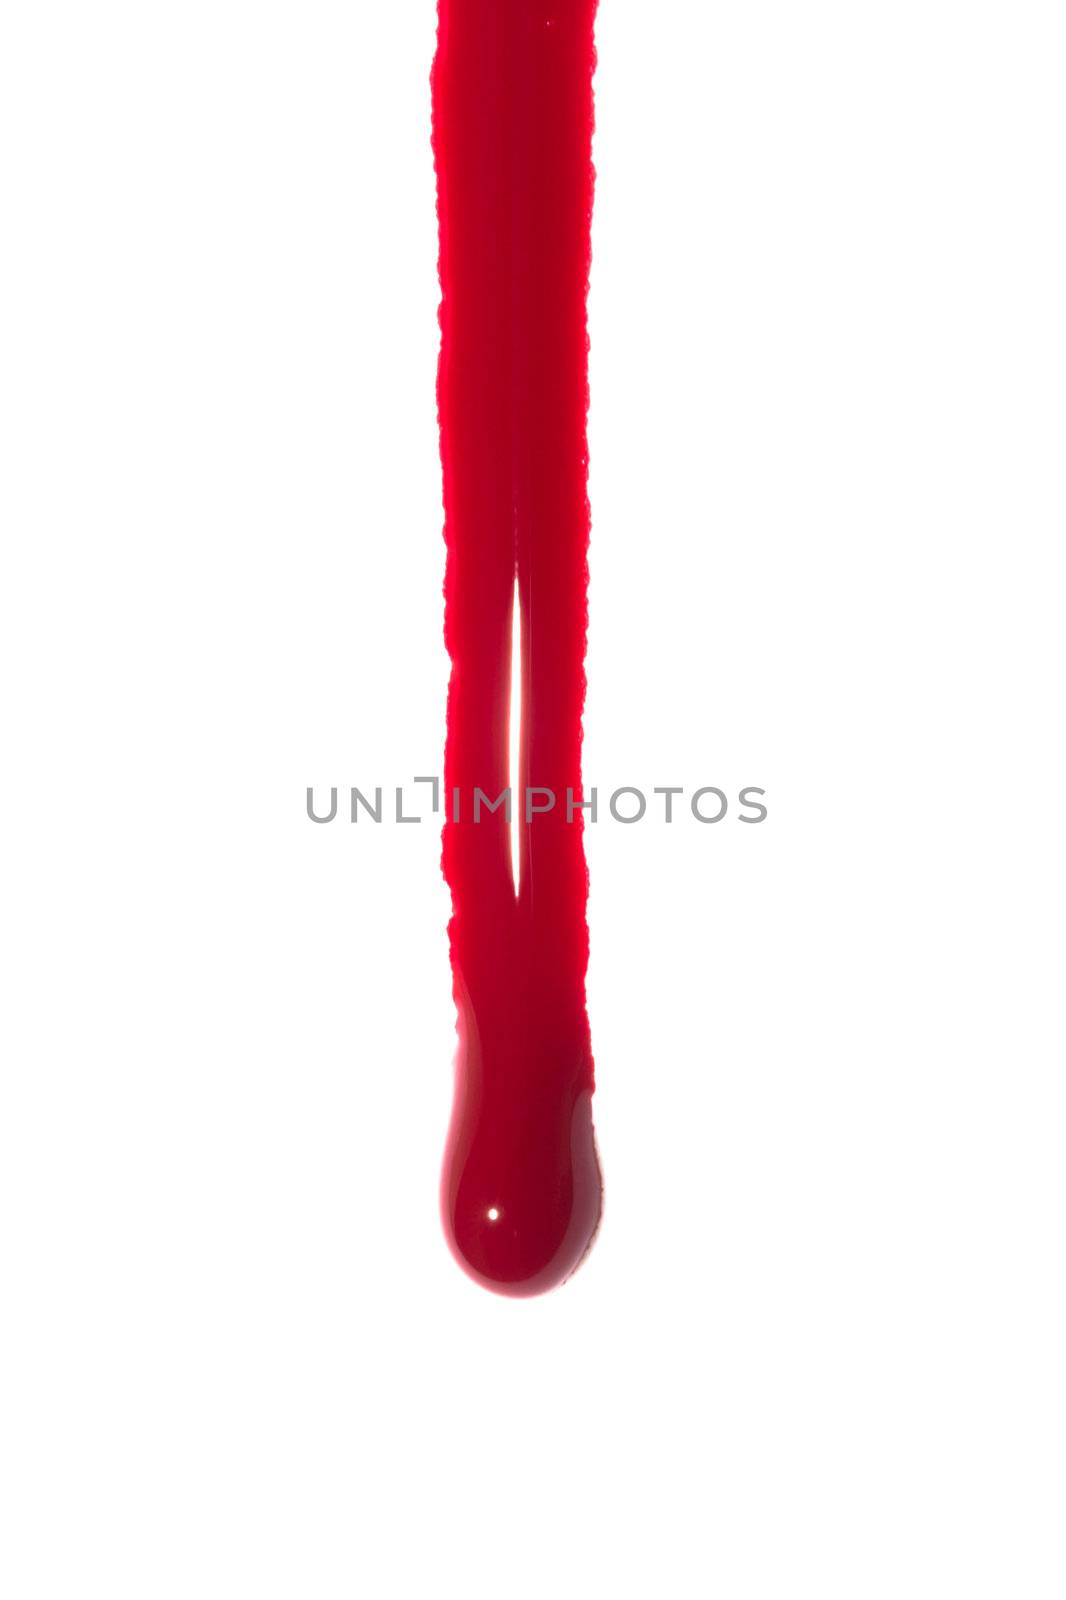 A high resolution image of a blood drips and drops